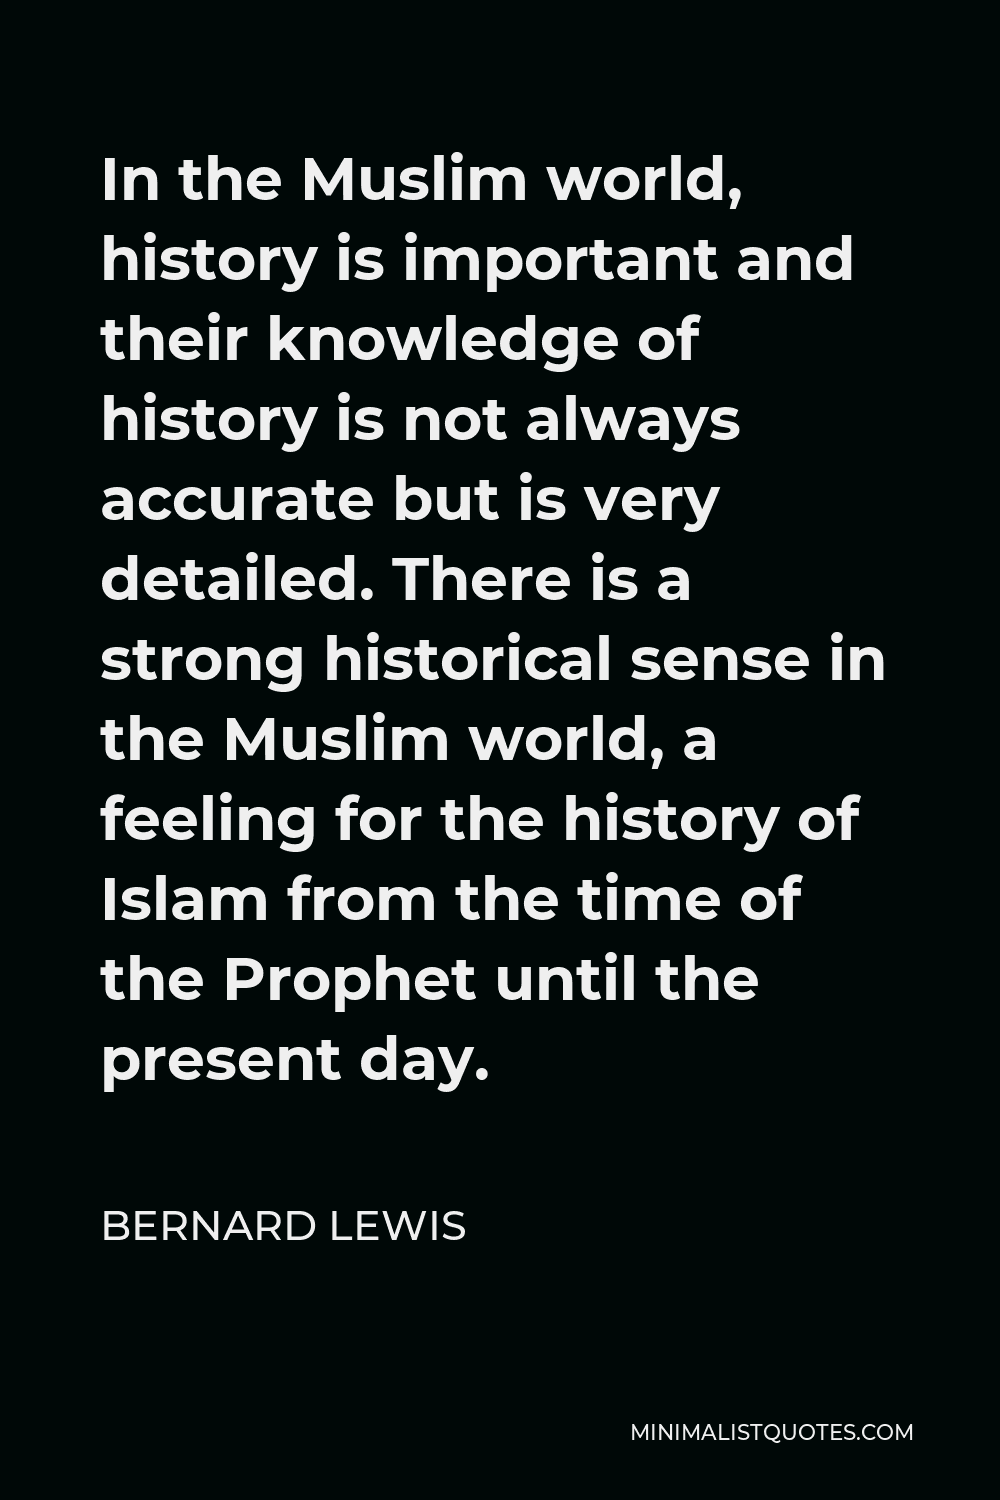 Bernard Lewis Quote - In the Muslim world, history is important and their knowledge of history is not always accurate but is very detailed. There is a strong historical sense in the Muslim world, a feeling for the history of Islam from the time of the Prophet until the present day.